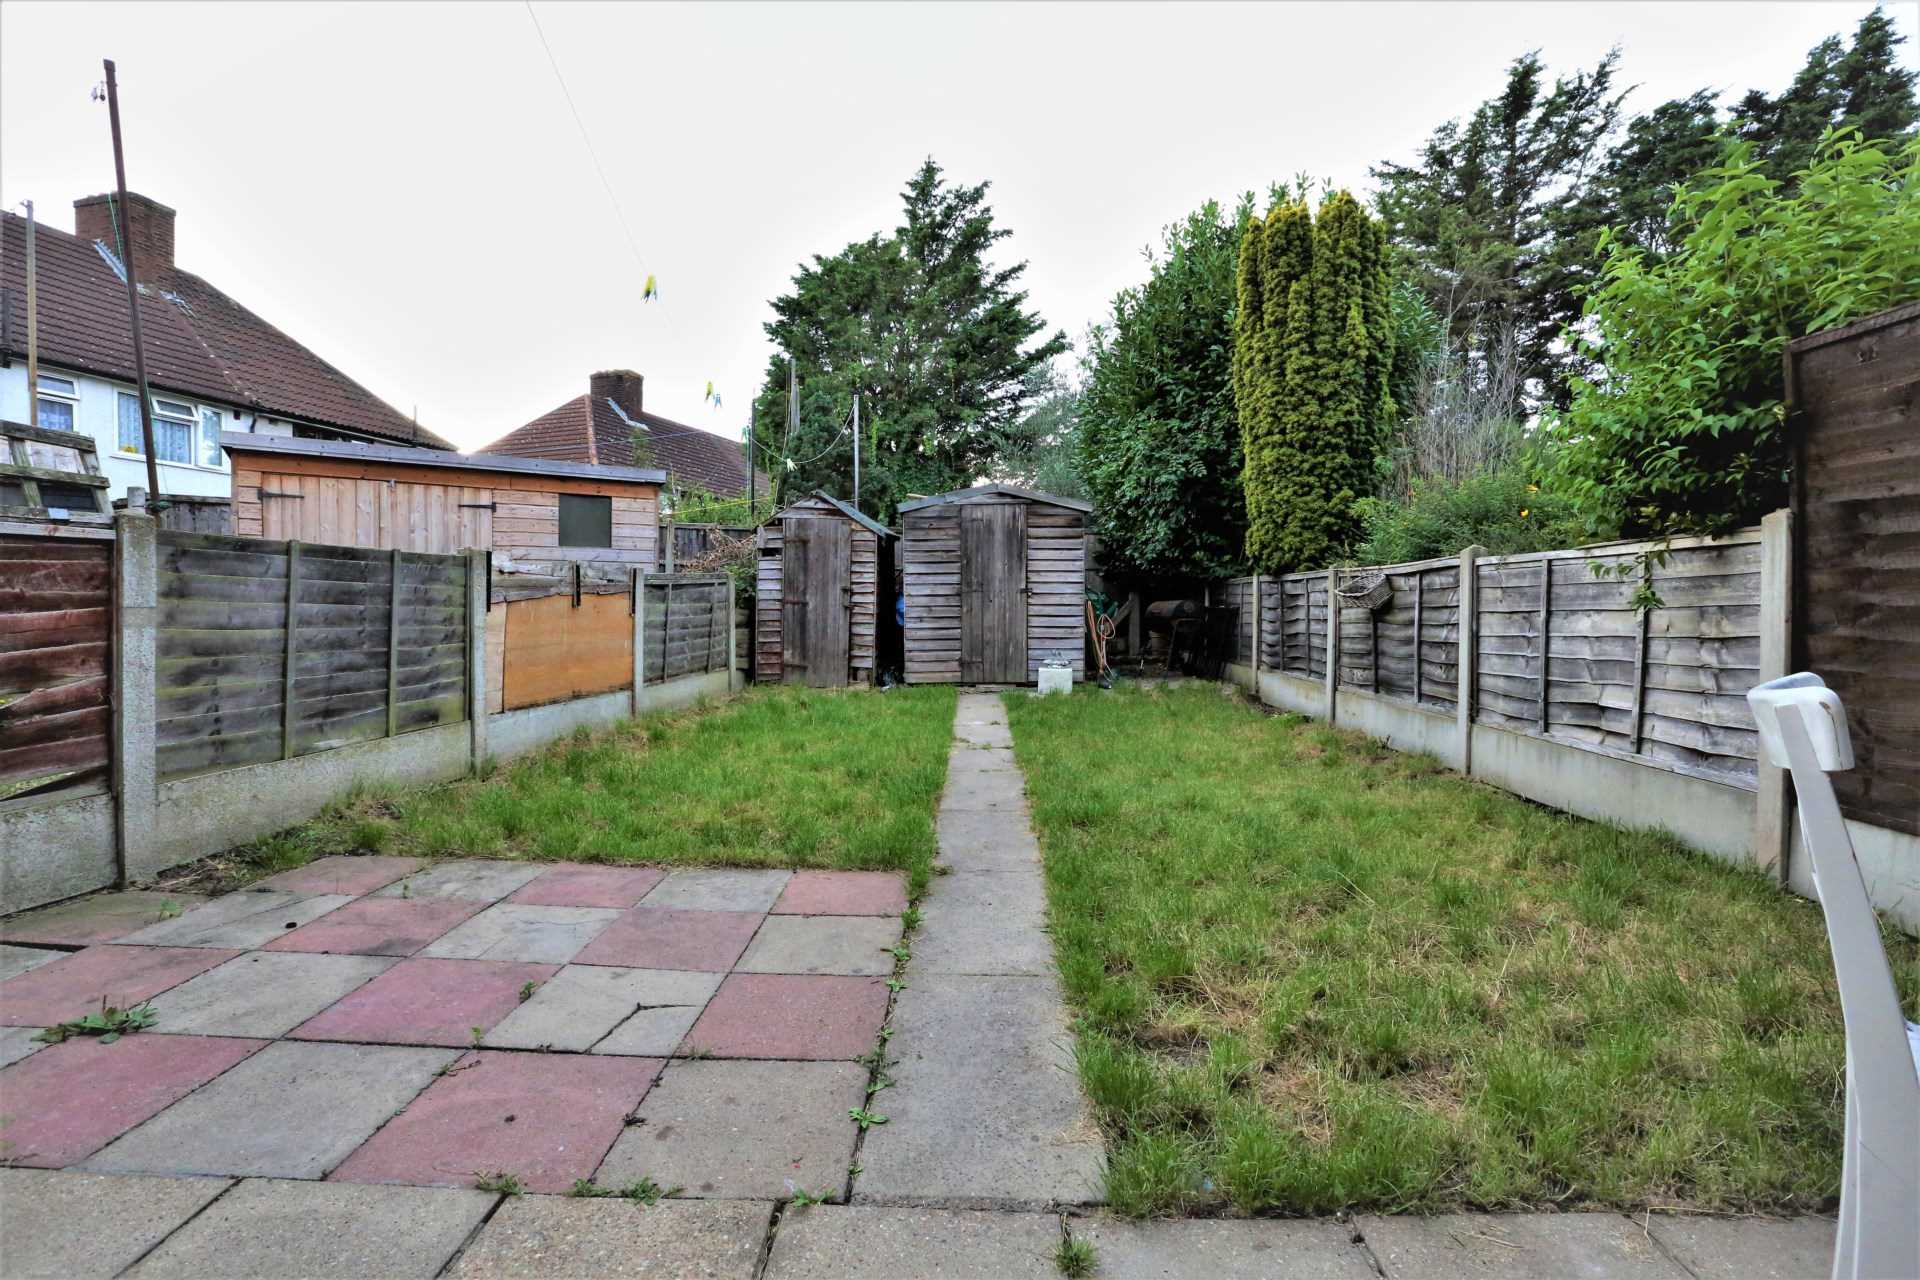 Gale Road, Becontree, Image 8